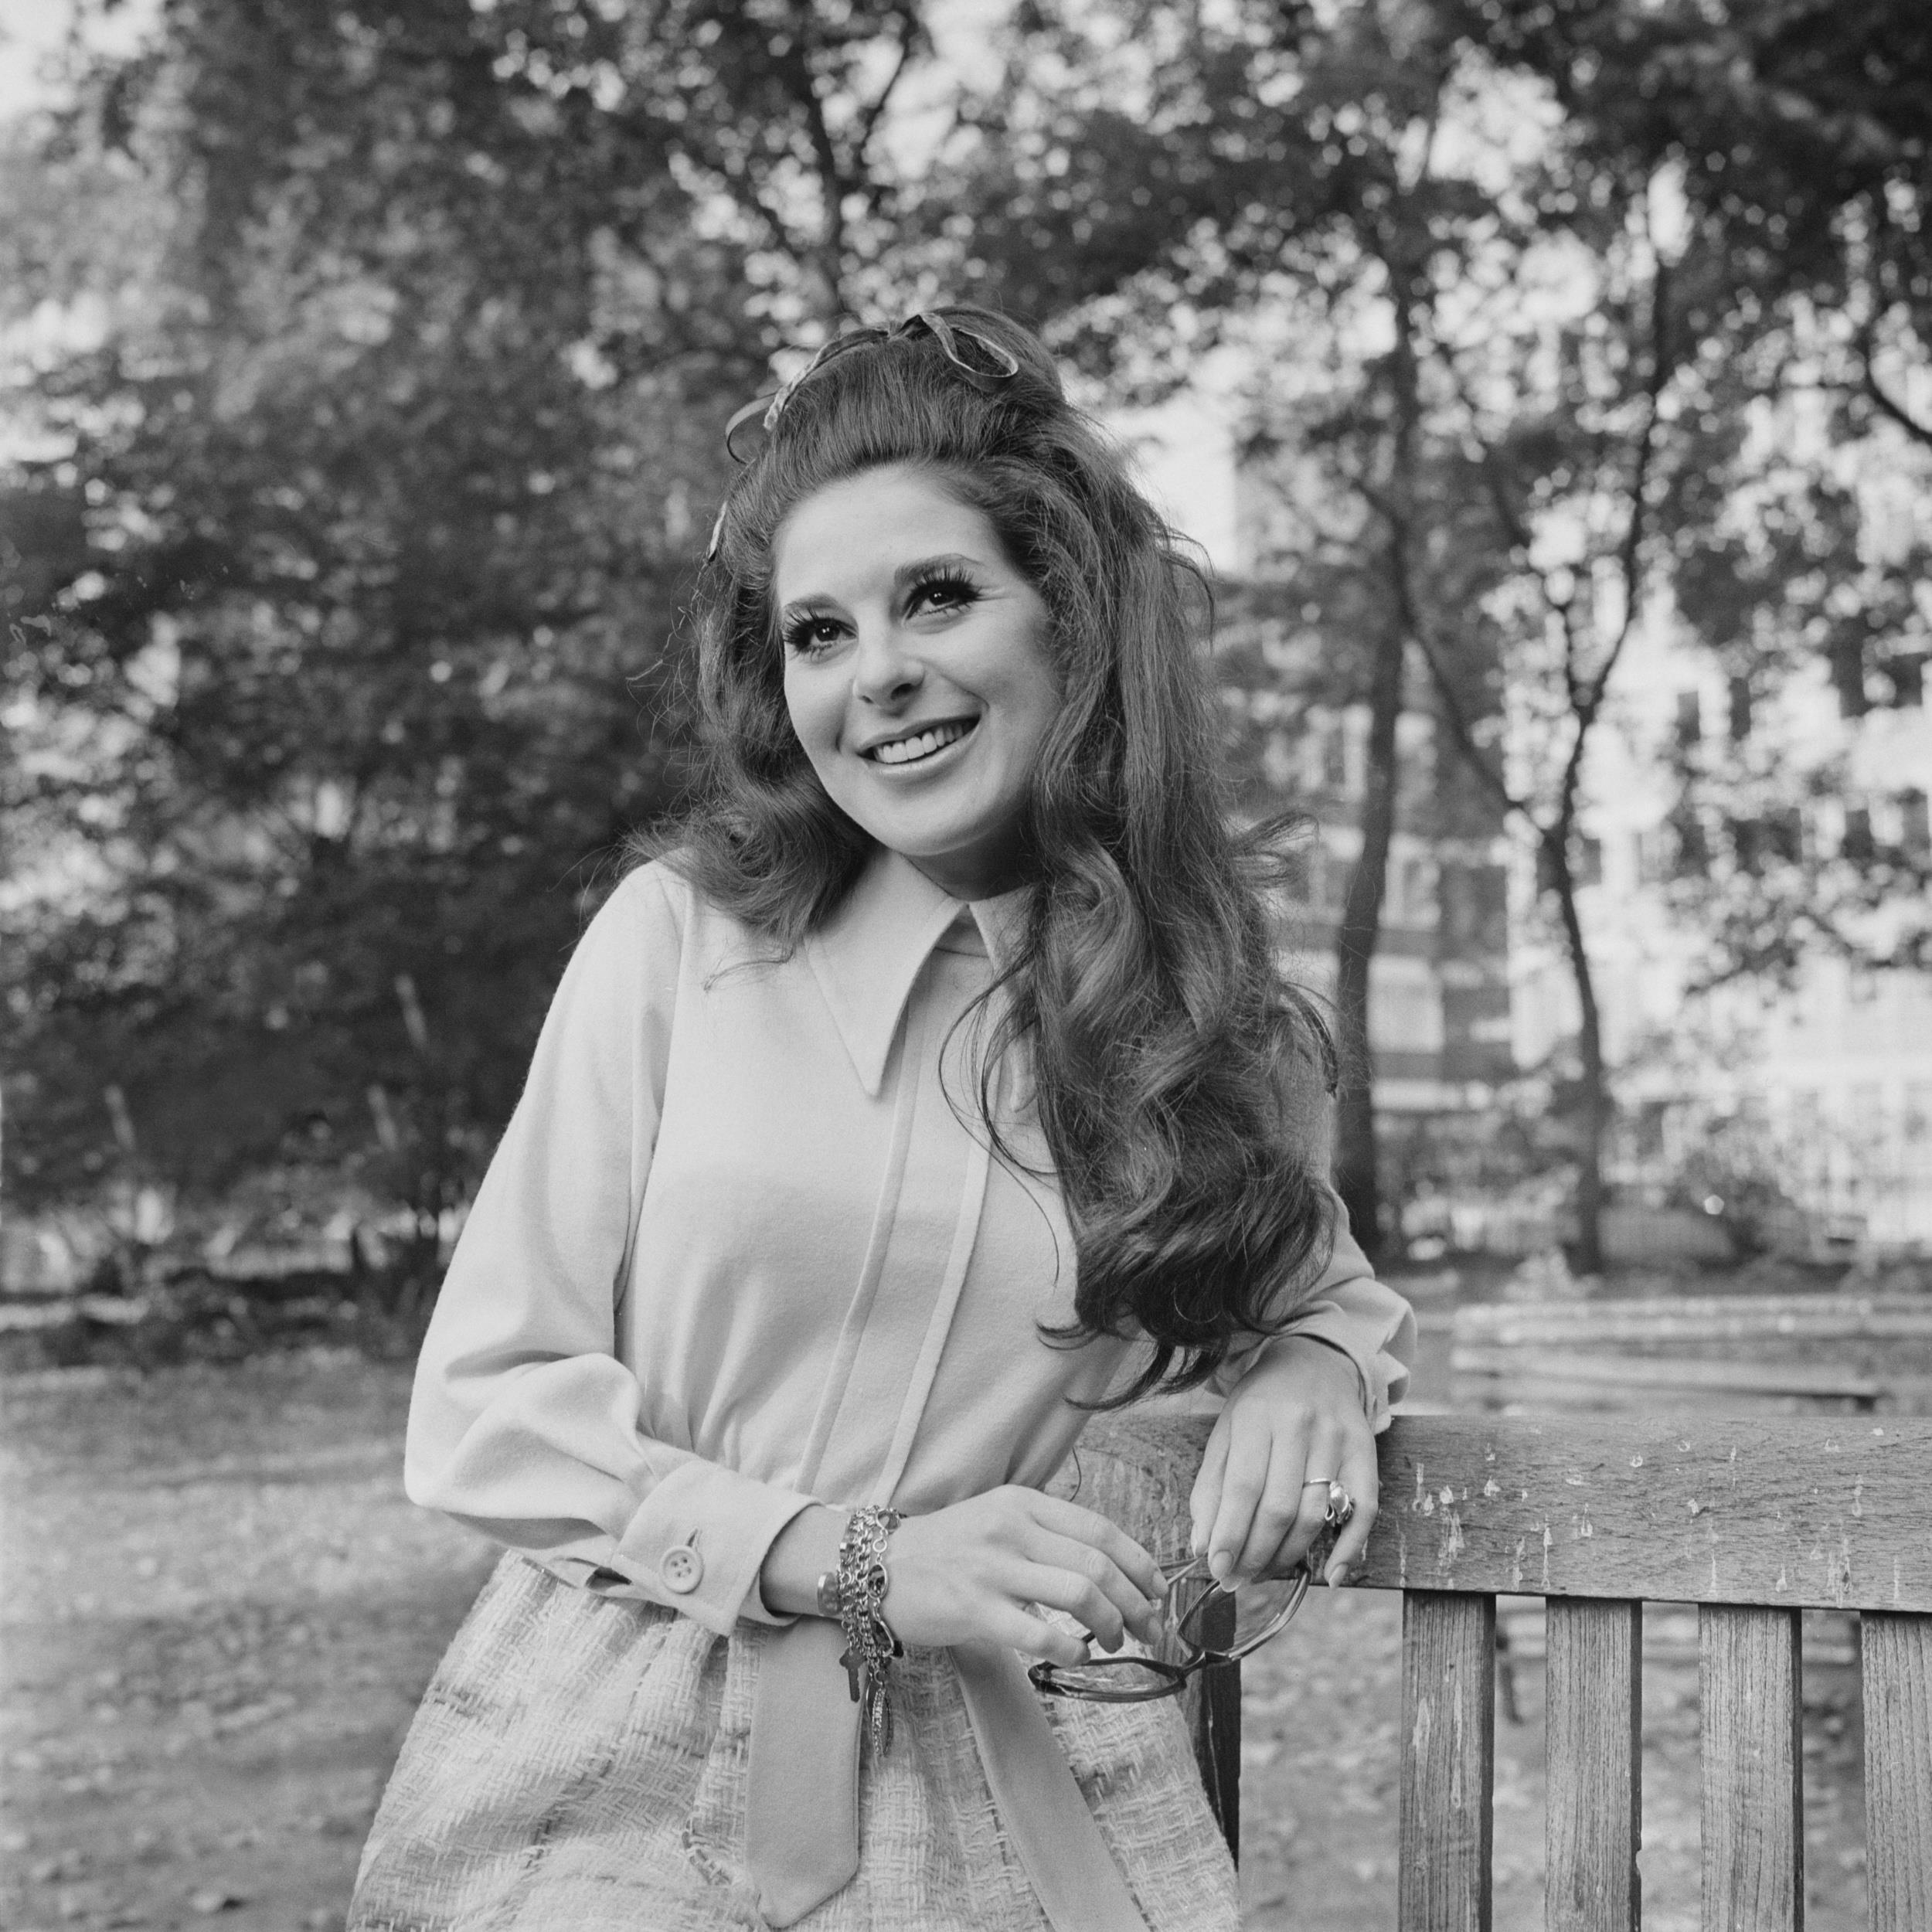 <p>Also difficult to pin down in terms of genre, Bobbie Gentry’s “Ode to Billie Joe” is deserving of a Hall of Fame nod in and of itself, but her duets alongside Glen Campbell totally seal the deal. Oh, and of course, her 1970 song “Fancy,” which made Reba McEntire a star more than two decades after Gentry wrote it. </p><p><a href='https://www.msn.com/en-us/community/channel/vid-cj9pqbr0vn9in2b6ddcd8sfgpfq6x6utp44fssrv6mc2gtybw0us'>Did you enjoy this slideshow? Follow us on MSN to see more of our exclusive entertainment content.</a></p>